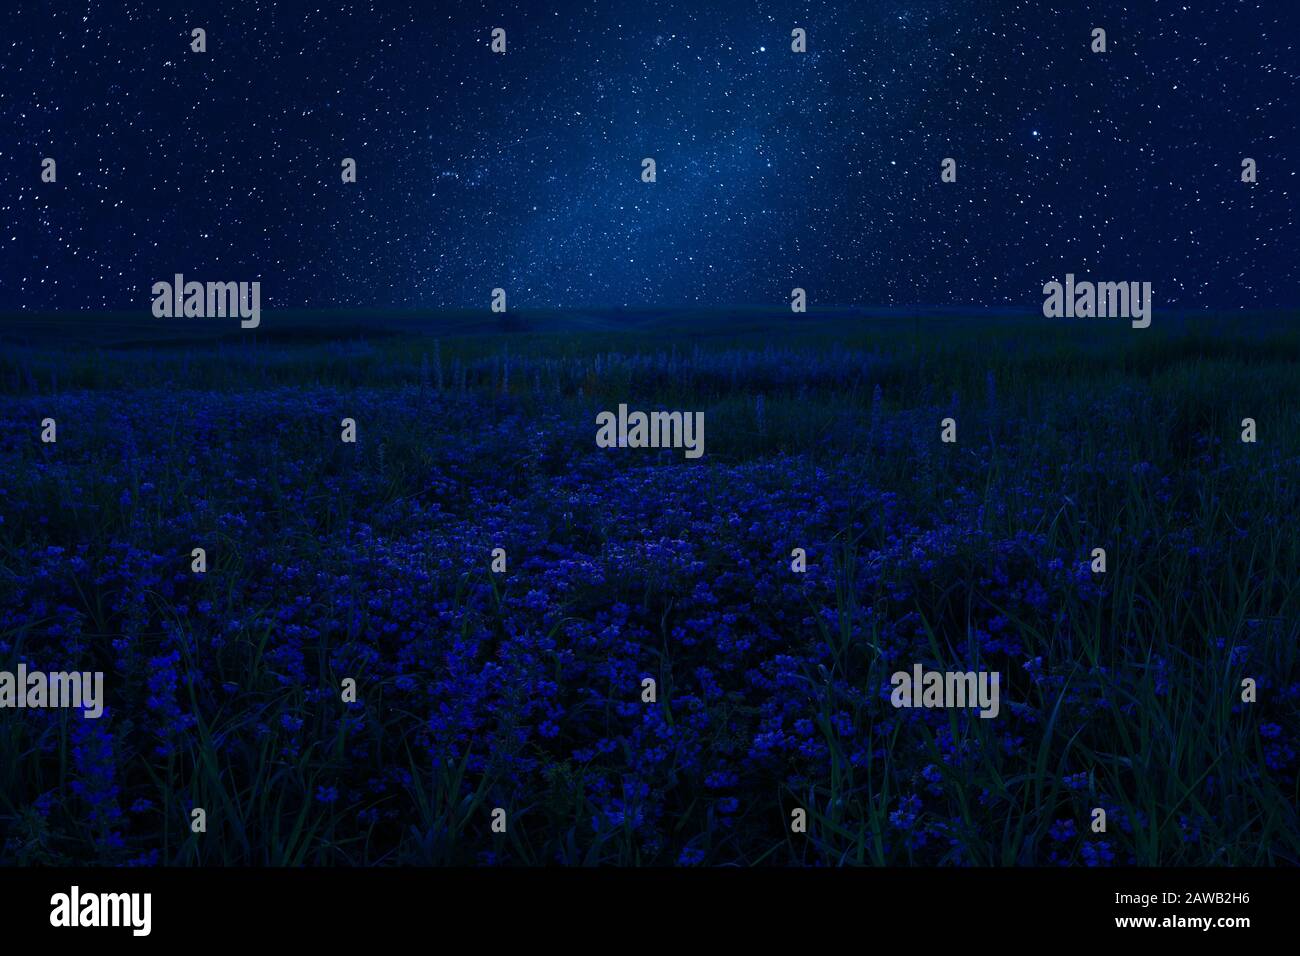 Night summer landscape with flowers on meadow and bright stars in sky. Nature floral background Stock Photo